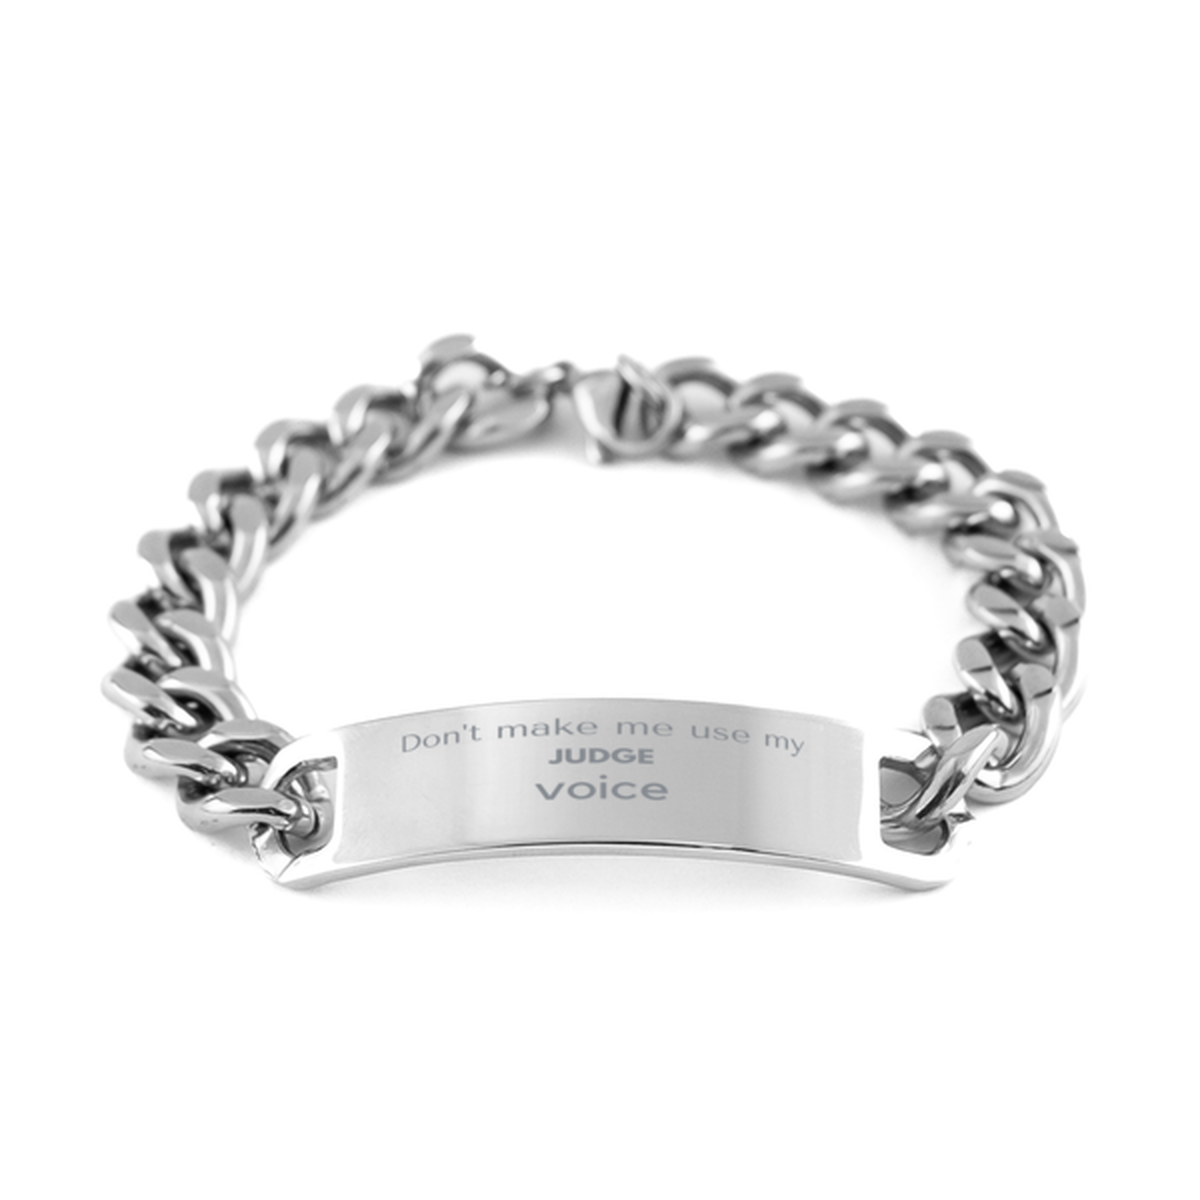 Don't make me use my Judge voice, Sarcasm Judge Gifts, Christmas Judge Cuban Chain Stainless Steel Bracelet Birthday Unique Gifts For Judge Coworkers, Men, Women, Colleague, Friends